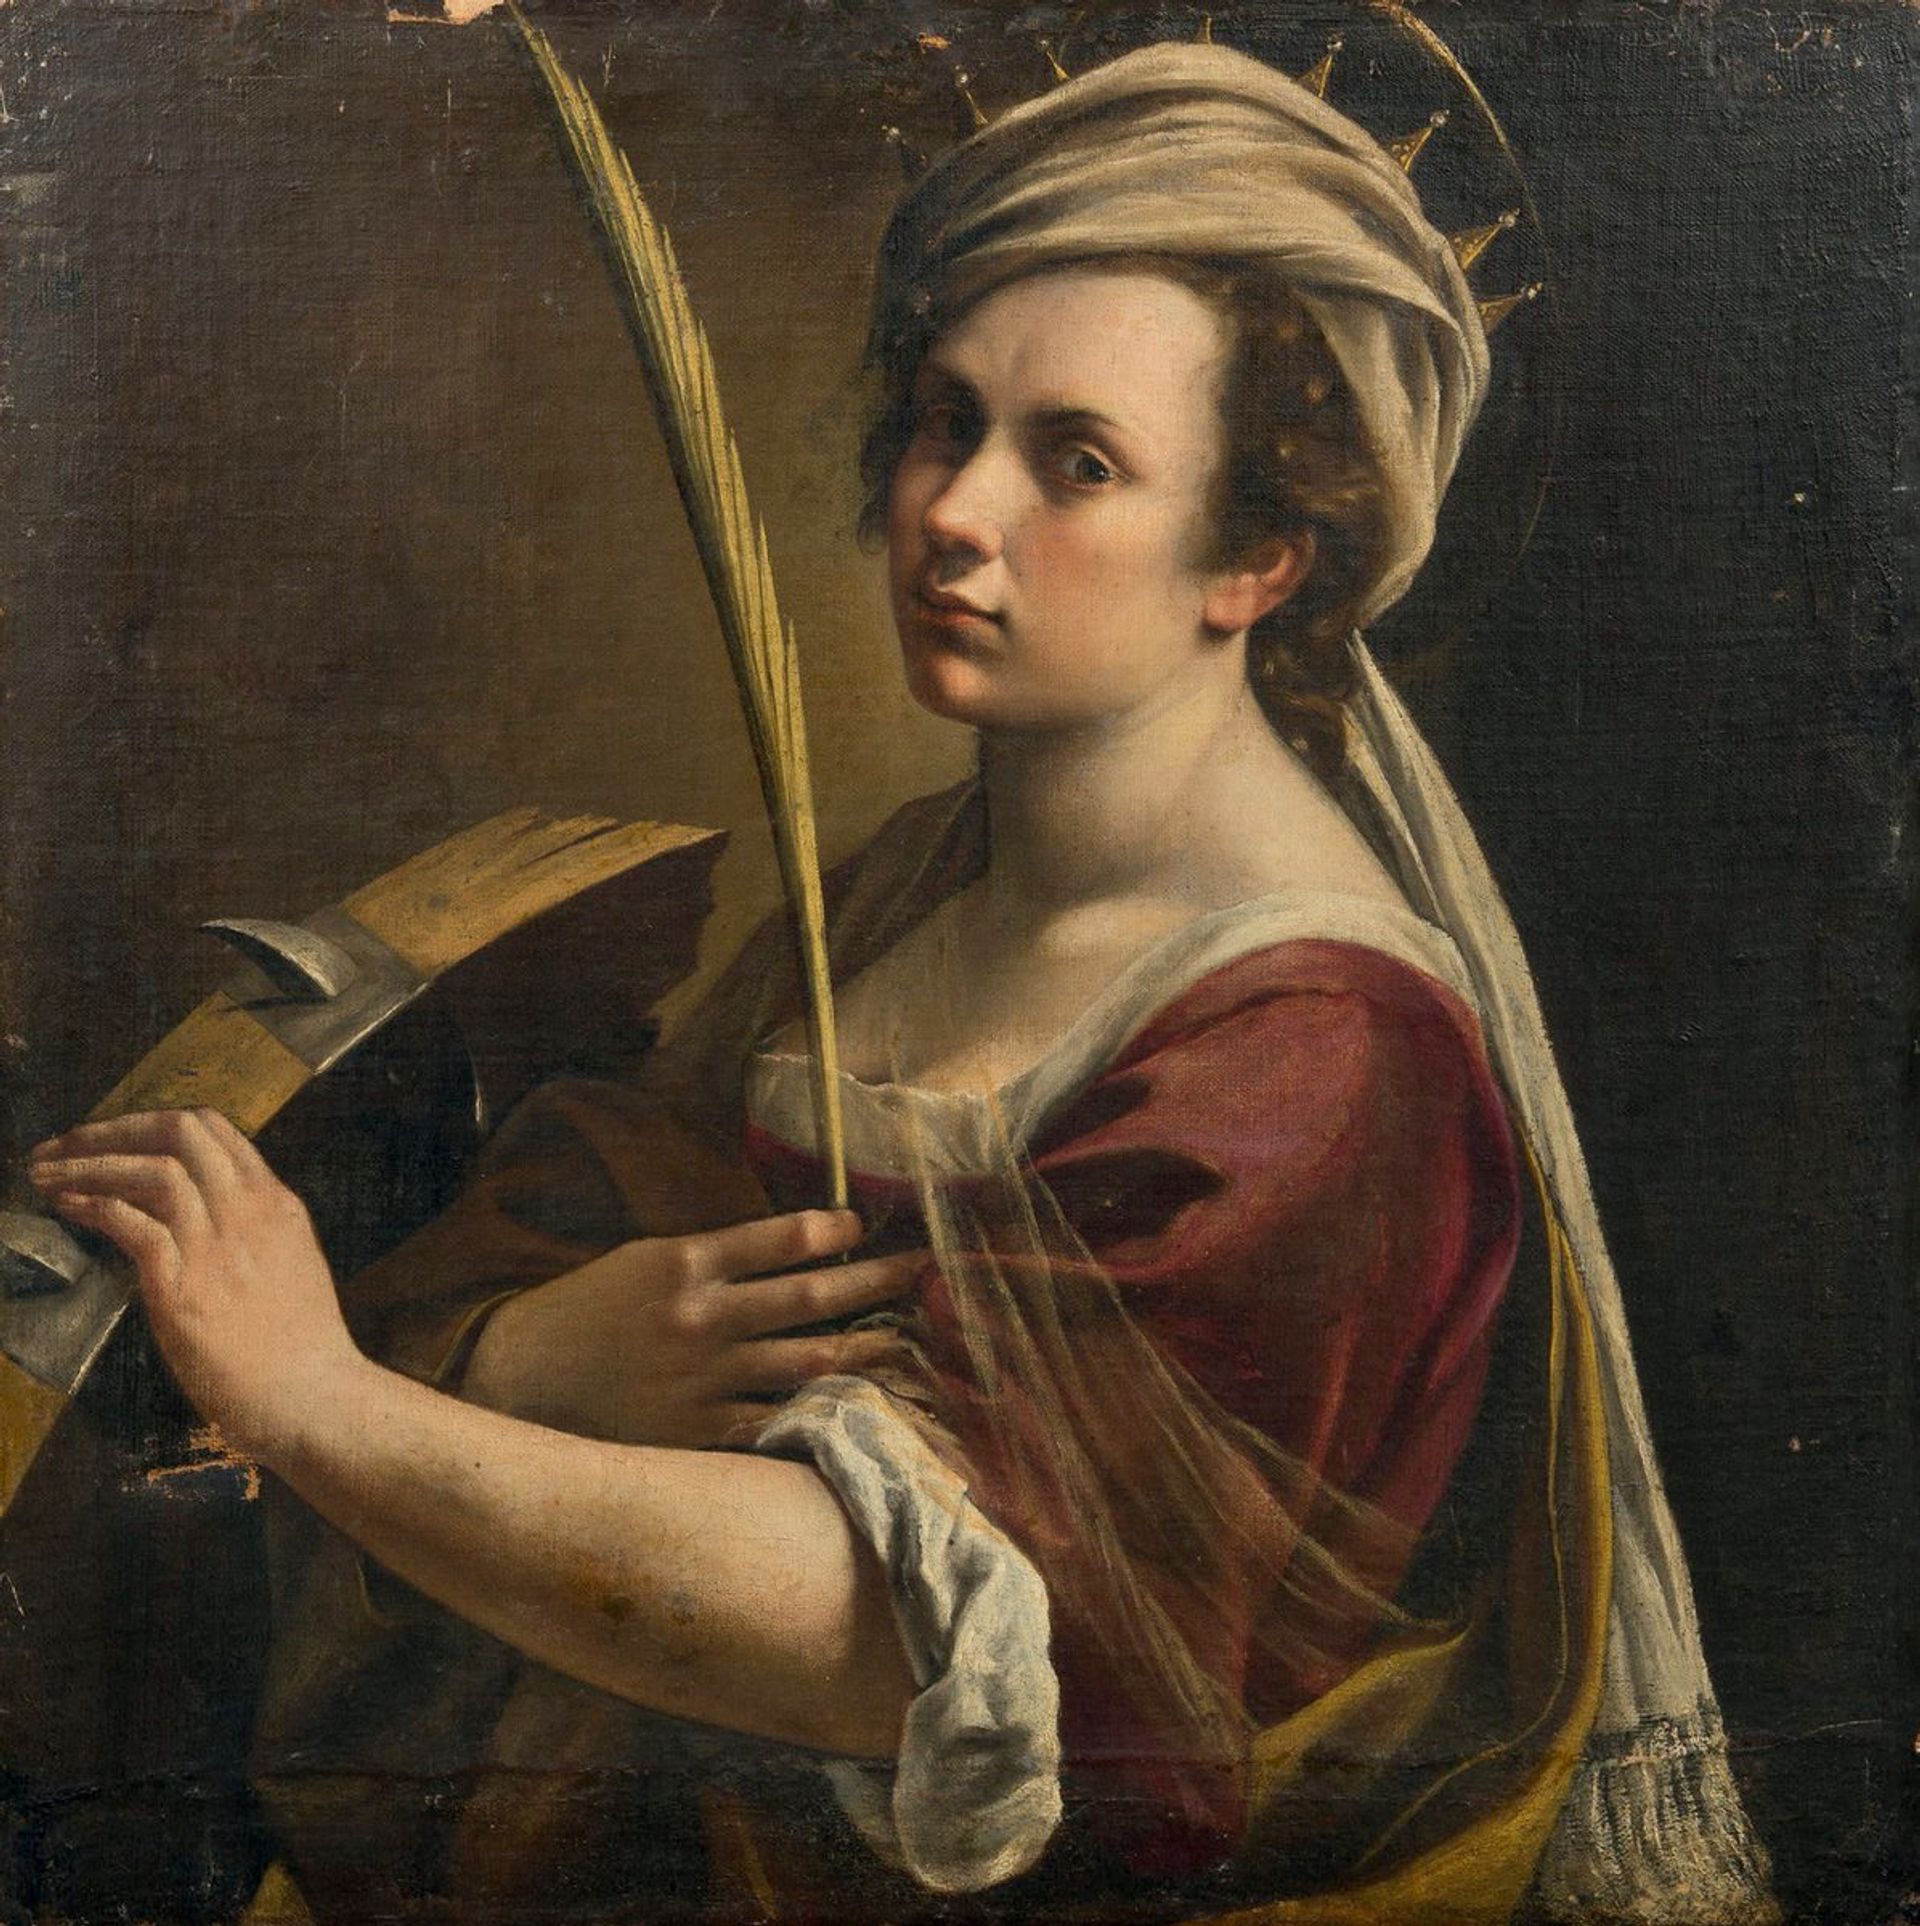 Self-Portrait as Saint Catherine by Artemisia Gentileschi sold at Drouot in Paris on 19 December for €2,360,600, an artist record 